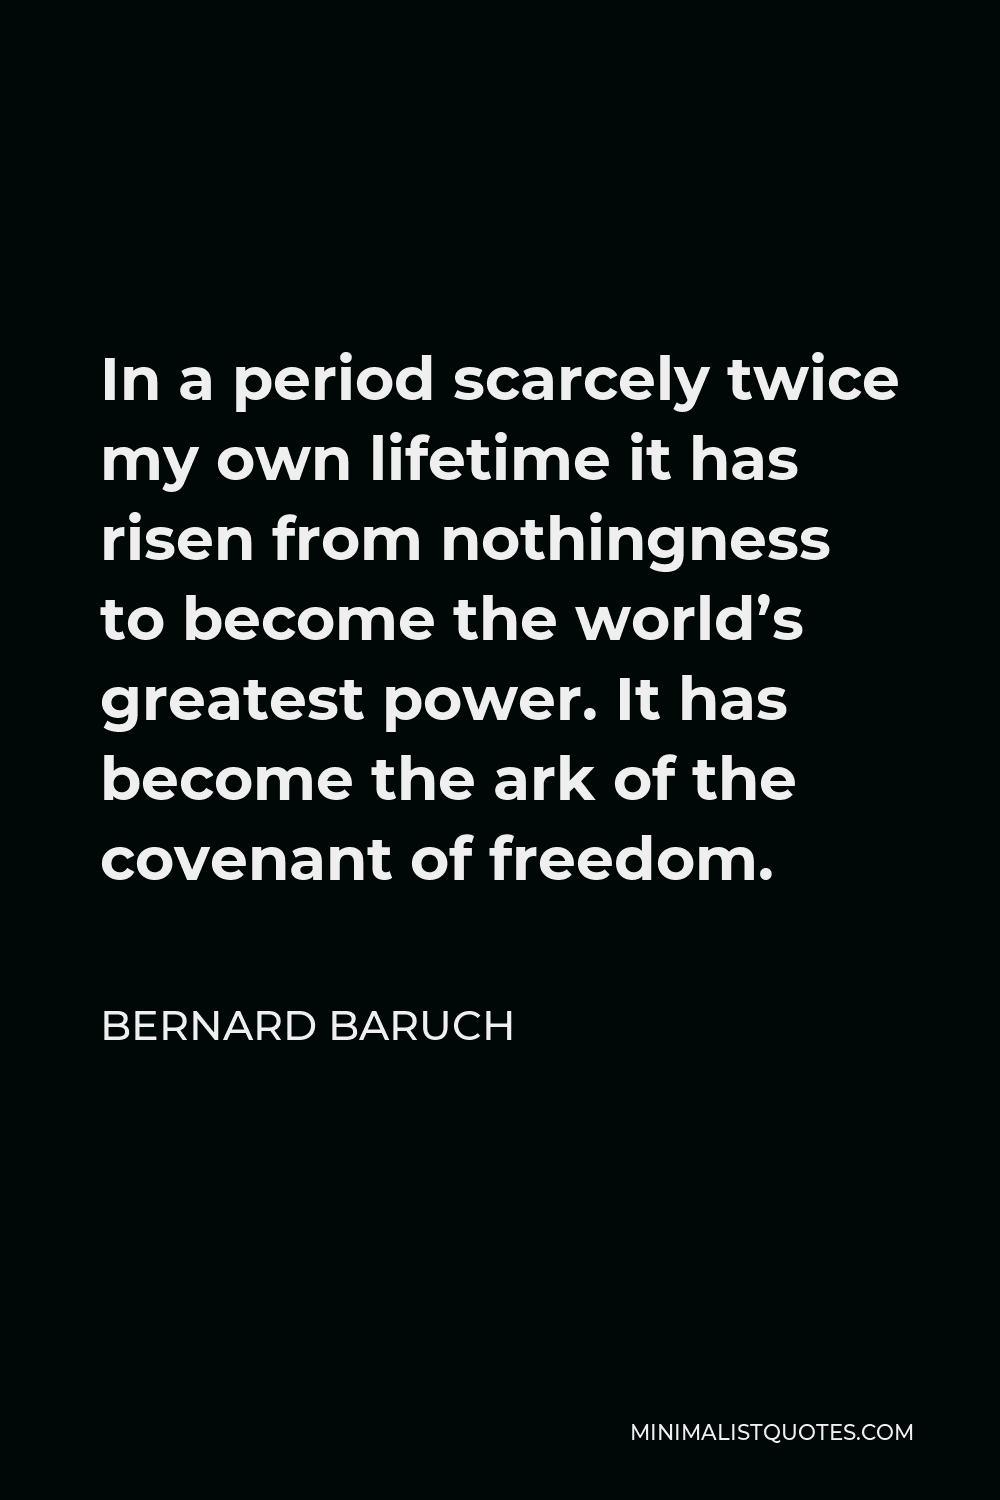 Bernard Baruch Quote - In a period scarcely twice my own lifetime it has risen from nothingness to become the world’s greatest power. It has become the ark of the covenant of freedom.